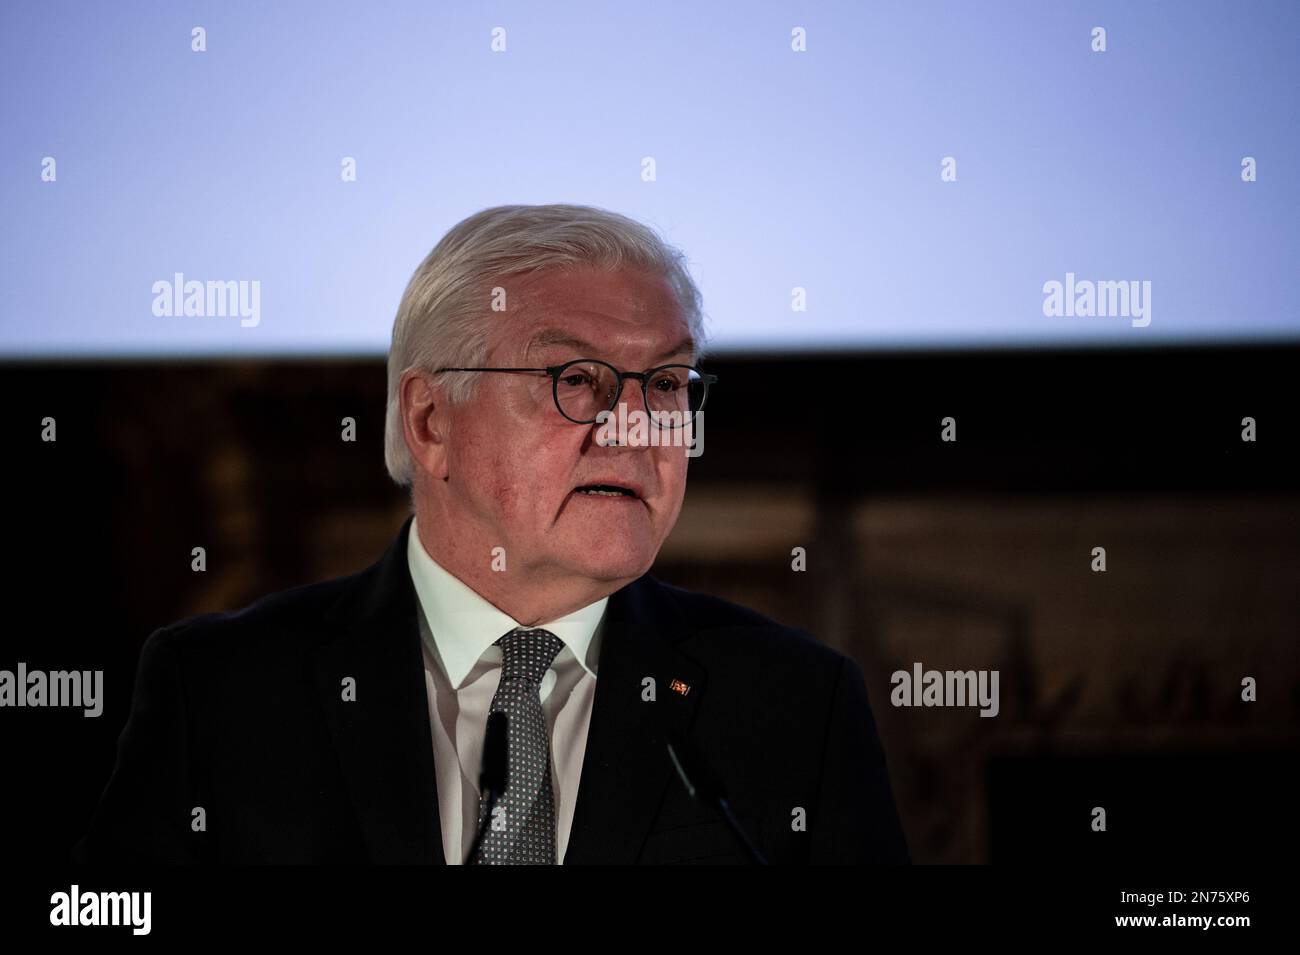 Essen, Germany. 10th Feb, 2023. German President Frank-Walter Steinmeier gives a speech during the ceremony. The celebration of the 150th 'Hügel anniversary' takes place at Villa Hügel in Essen. The highlight of the ceremony is the official opening of the transmedia real-time installation 'kontraste' by Federal President Steinmeier. Credit: Fabian Strauch/dpa/Alamy Live News Stock Photo